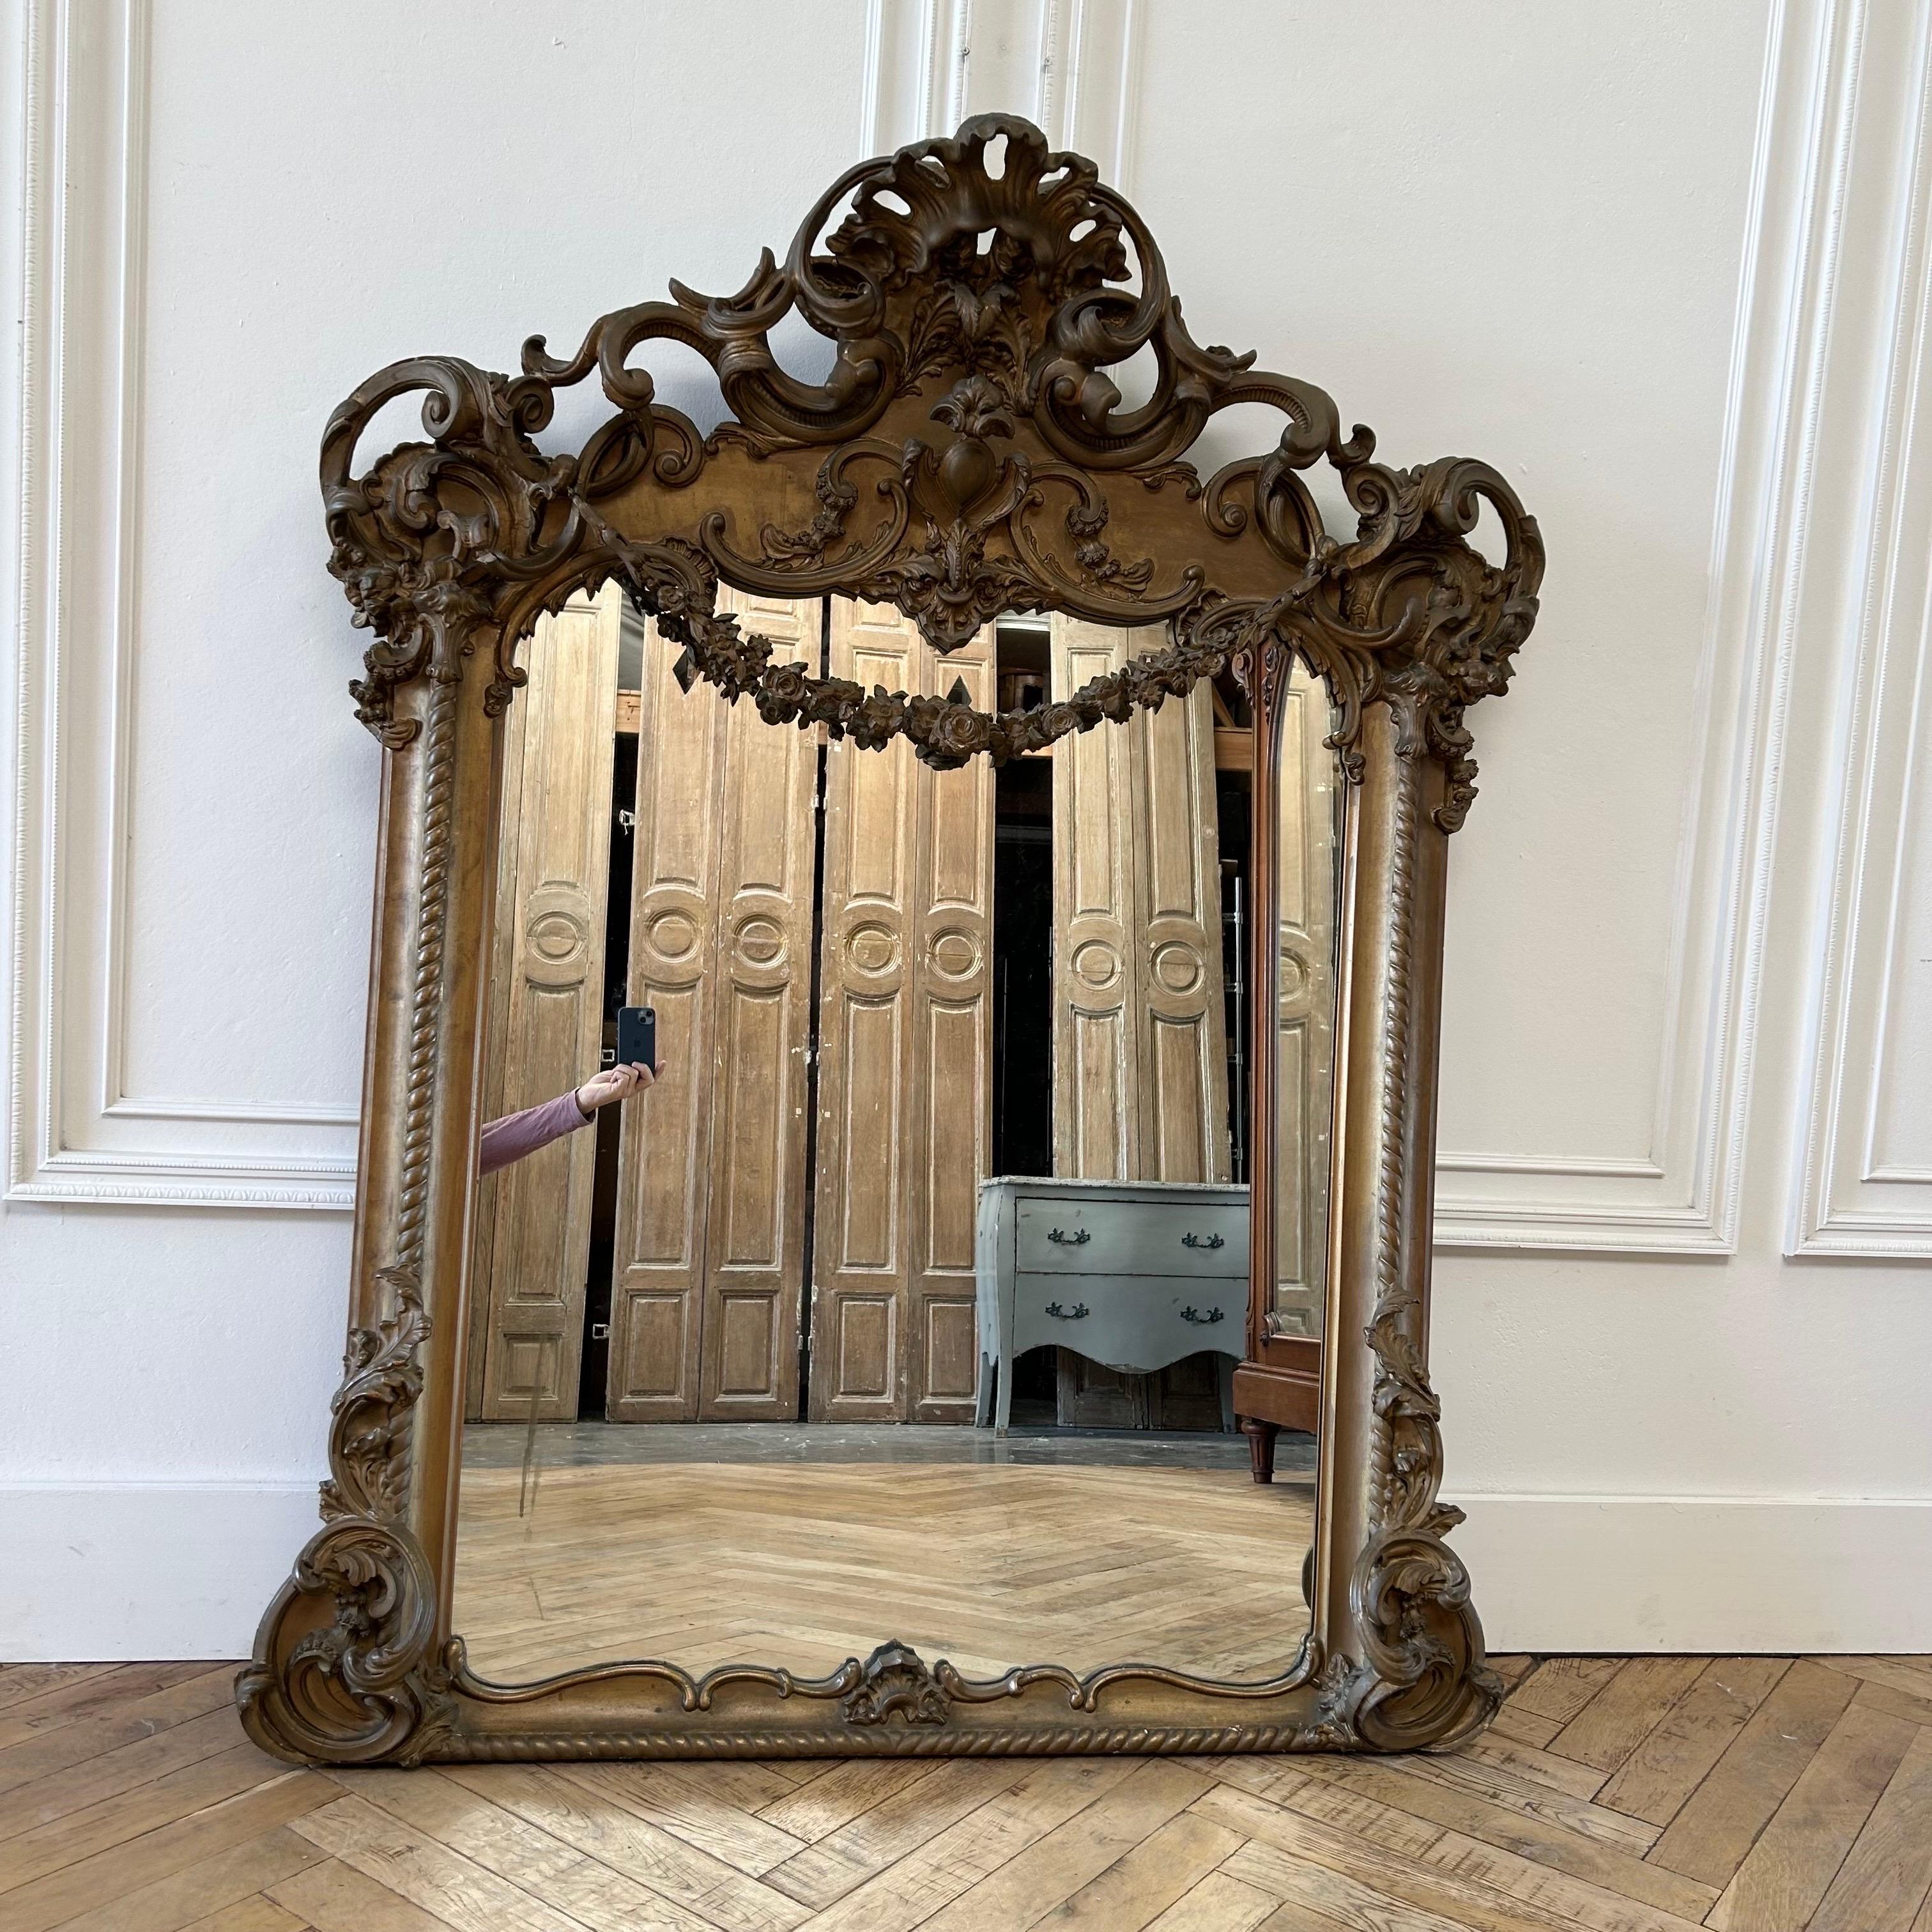 Antique French Rose swag mirror
Original gilt wood finish, subtle distressed edges.
Carvings are done in wood and gesso. The swag on the front of the mirror is detachable, and held onto the mirror with metal hooks.
Size: 50”w x 10”d x 63”h